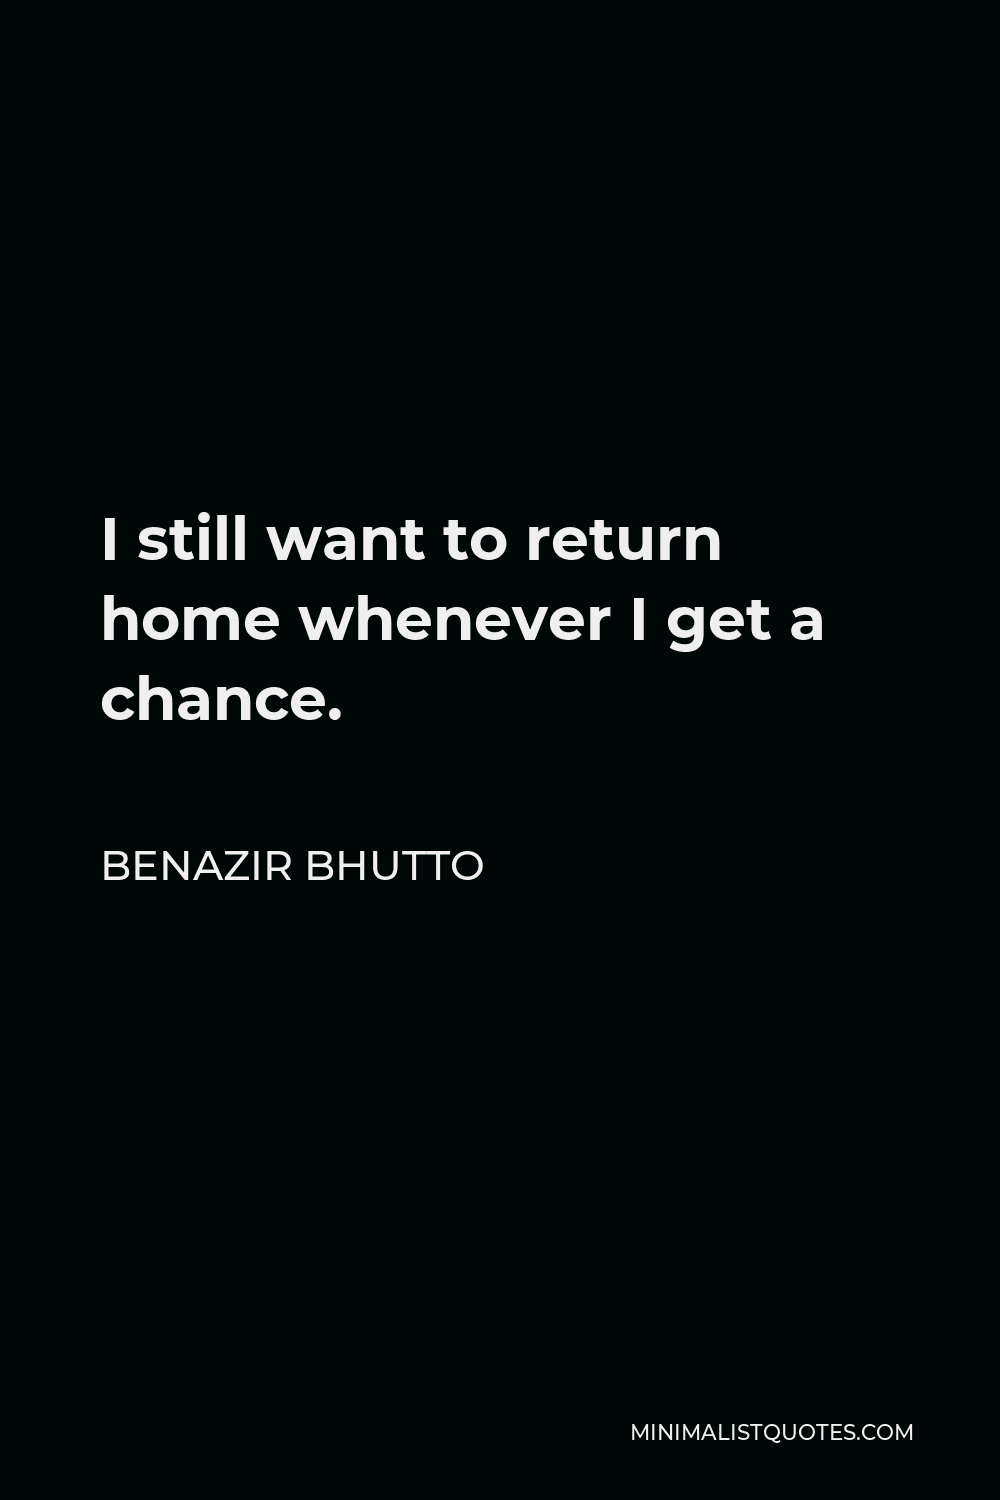 Benazir Bhutto Quote - I still want to return home whenever I get a chance.